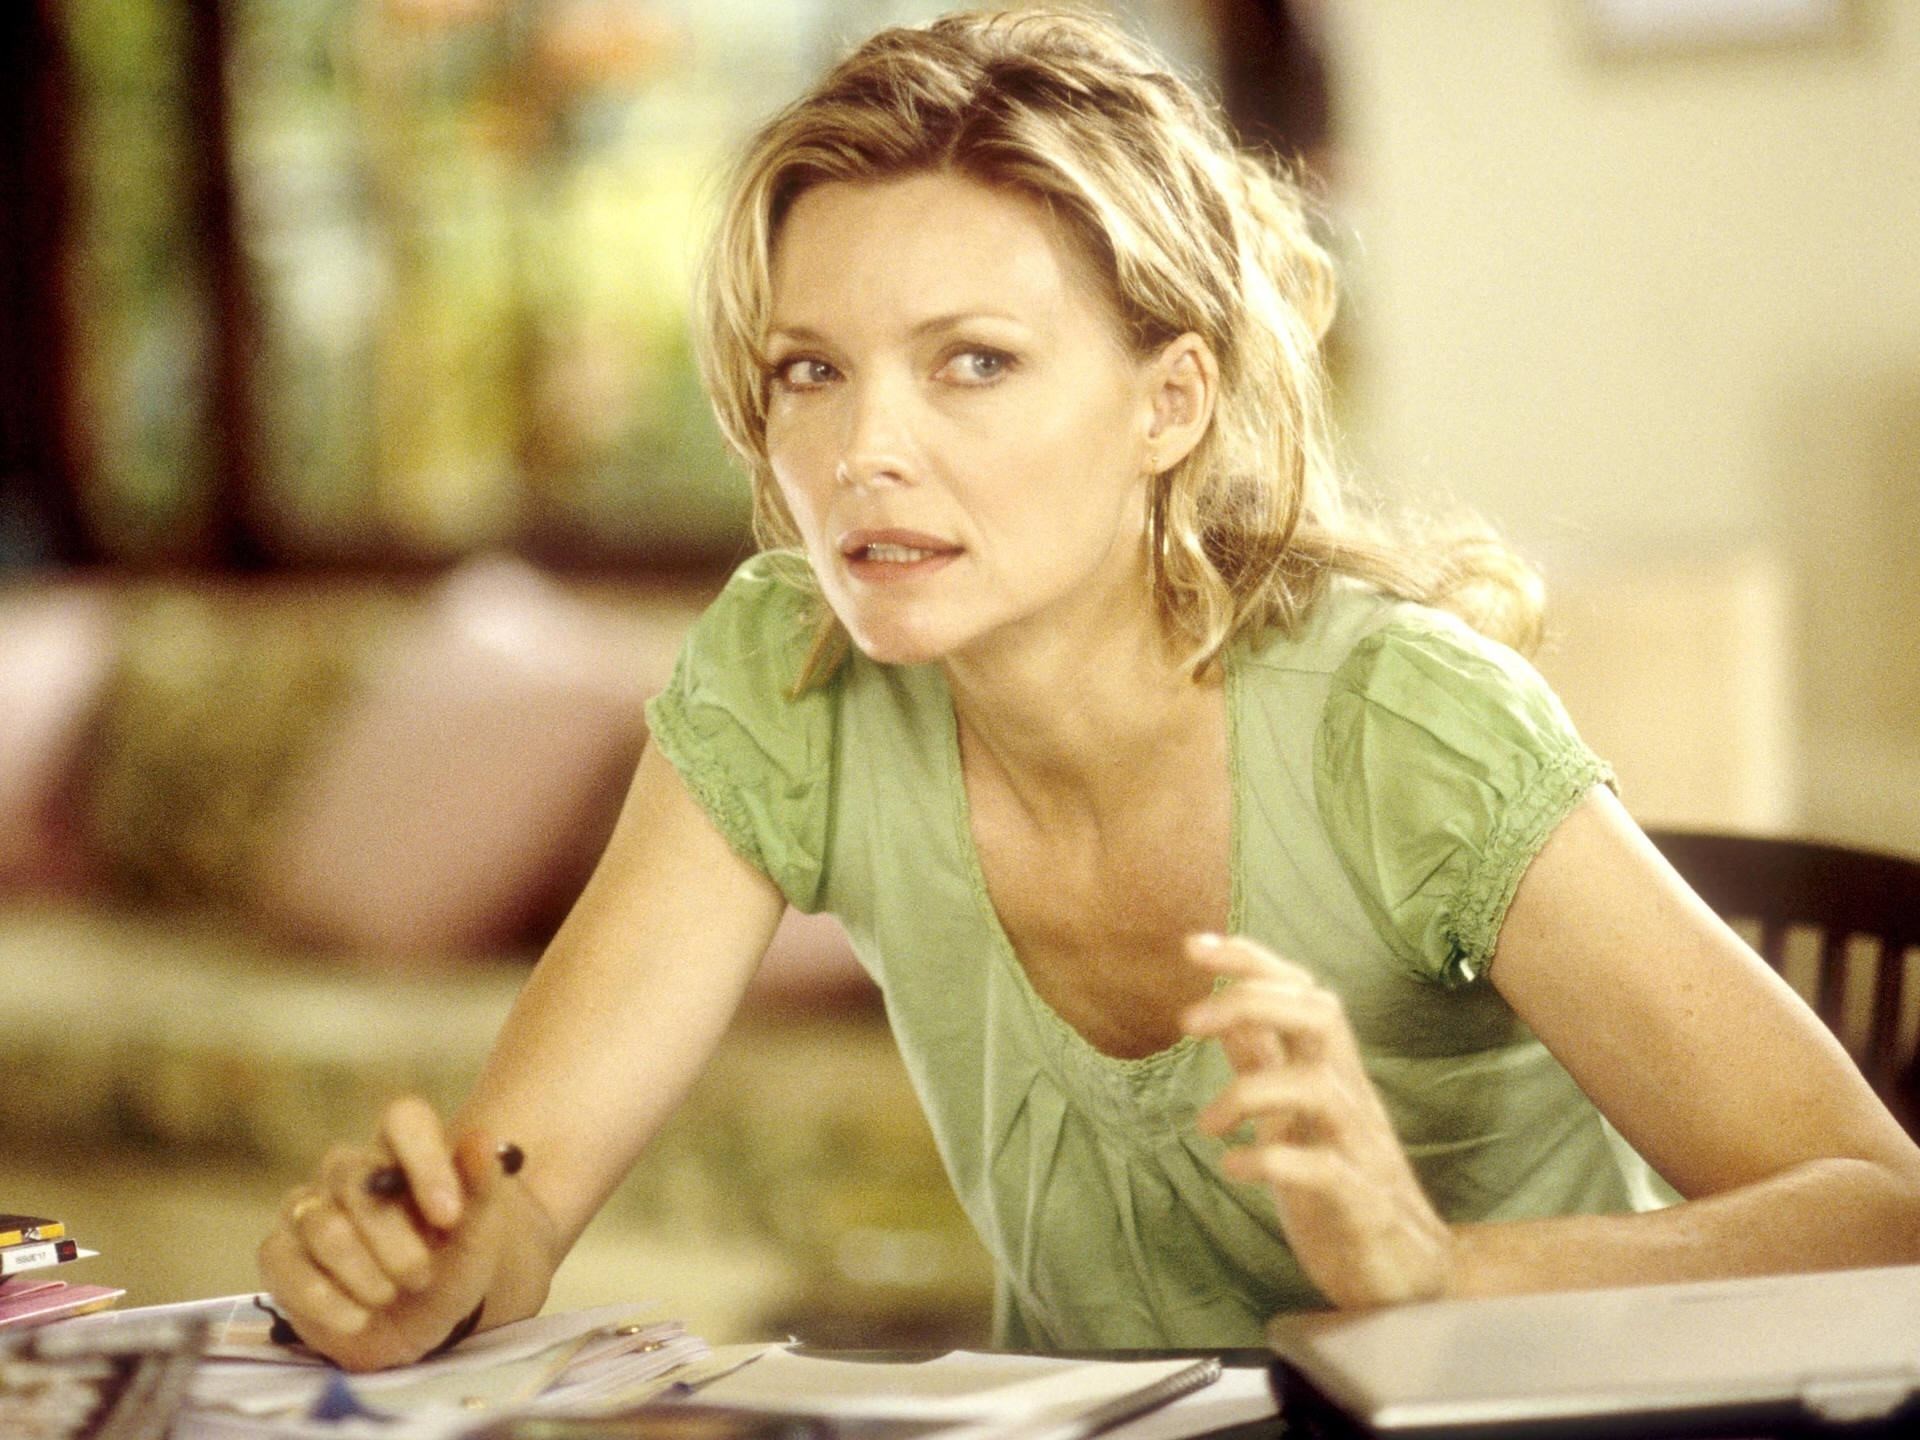 1920x1440 Wallpapers Backgrounds - Michelle Pfeiffer Wallpapers